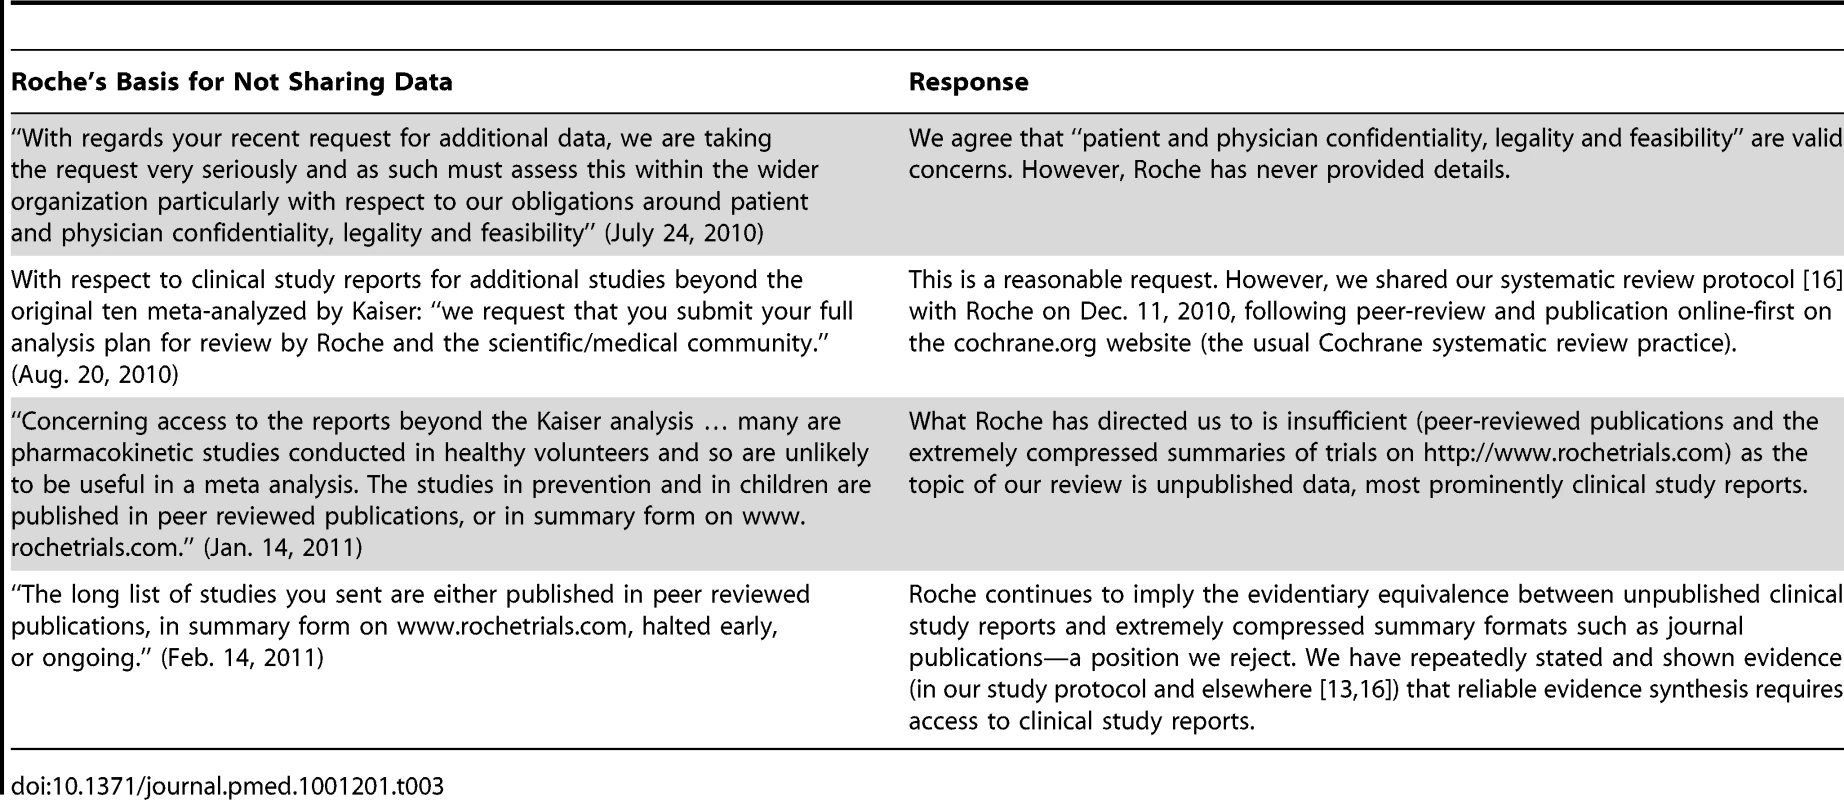 Roche's reasons for not sharing its clinical study reports and the authors' response (for other Tamiflu trials).